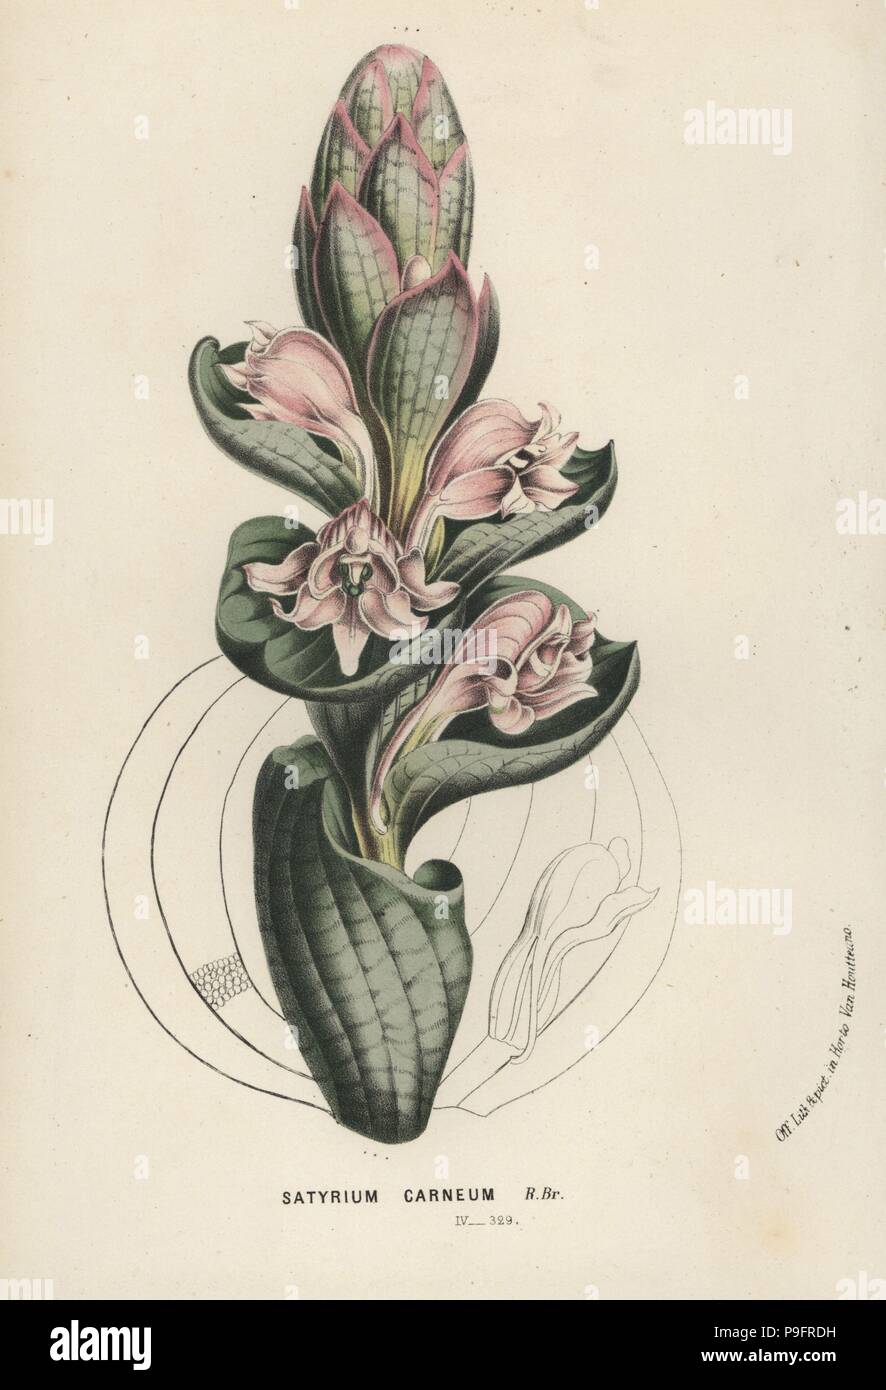 Satyrium carneum orchid. Handcoloured lithograph from Louis van Houtte and Charles Lemaire's Flowers of the Gardens and Hothouses of Europe, Flore des Serres et des Jardins de l'Europe, Ghent, Belgium, 1867-1868. Stock Photo